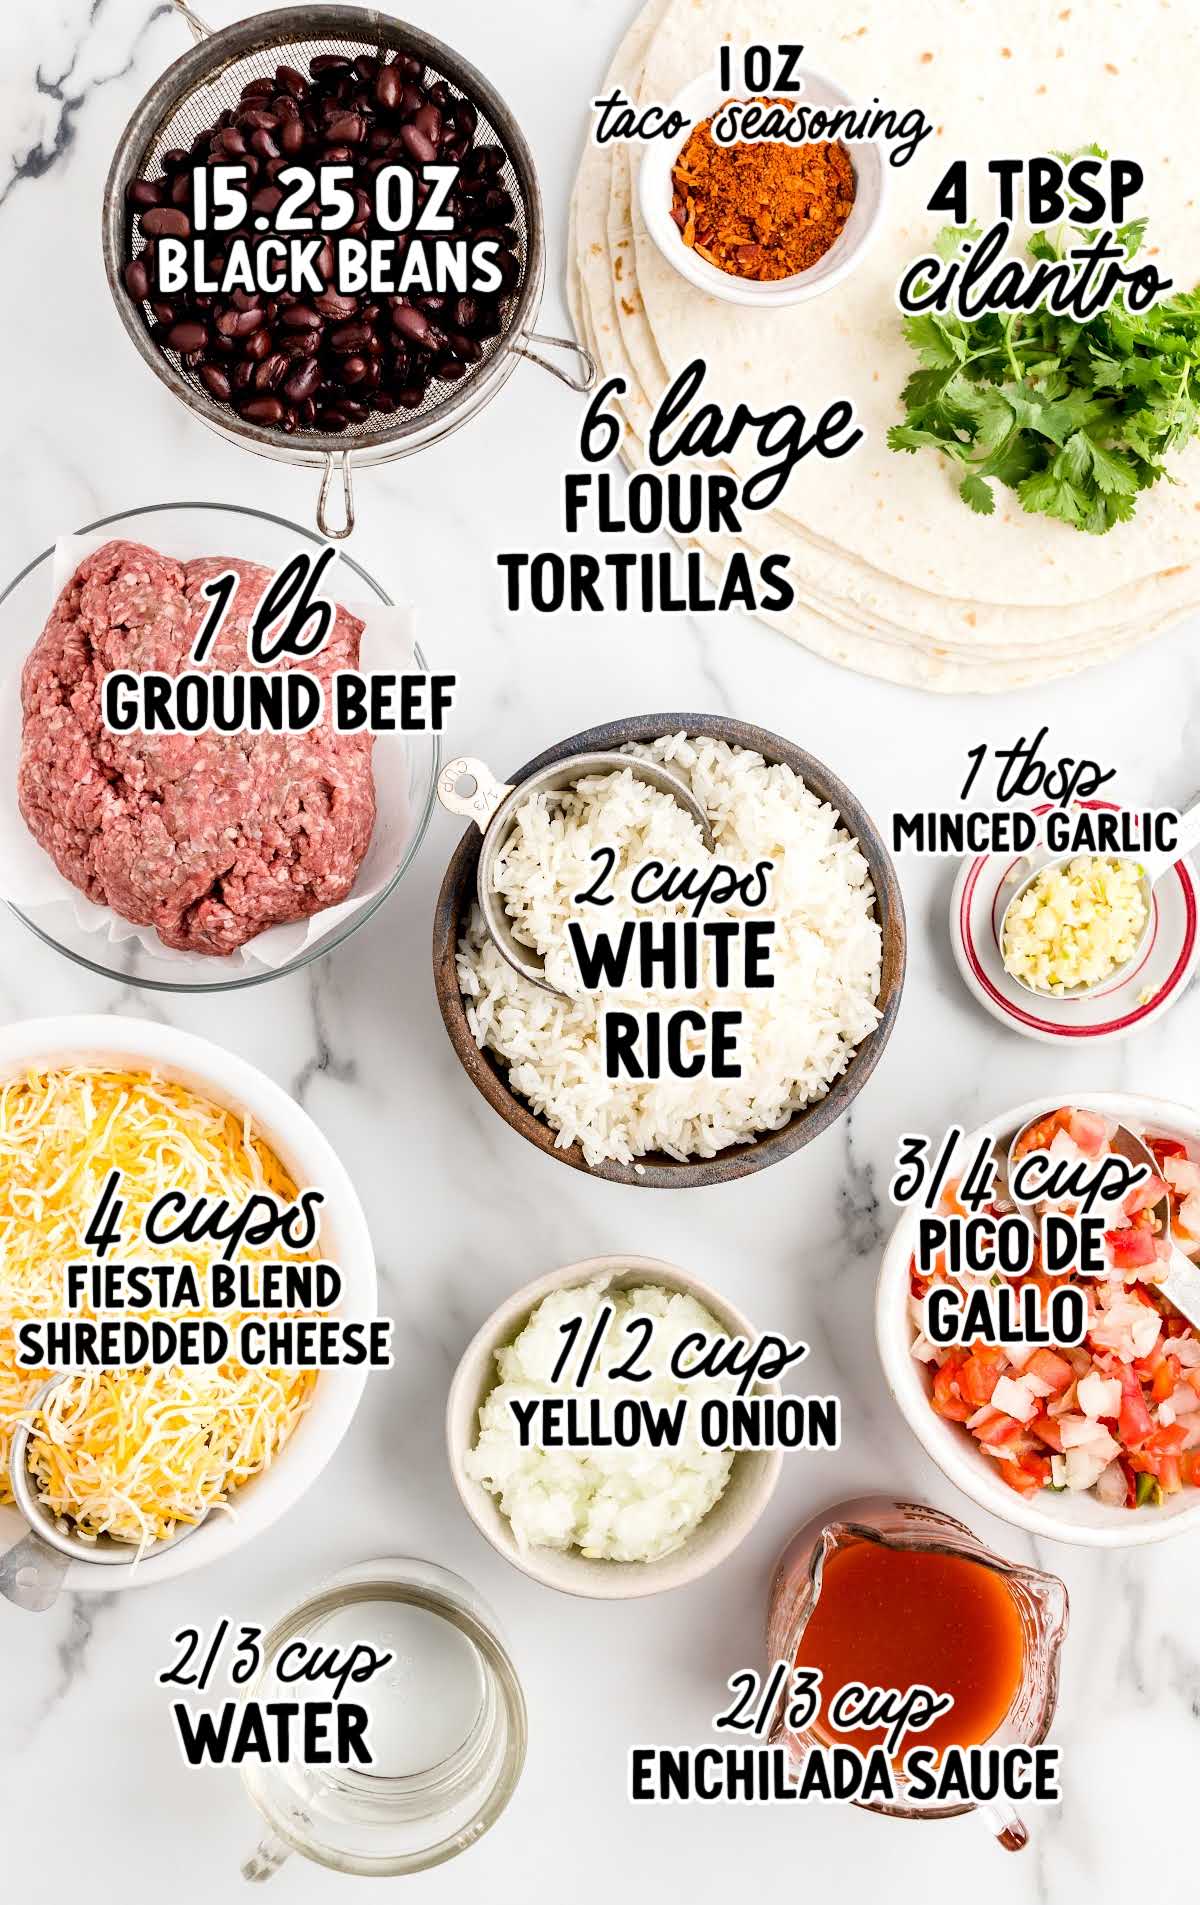 Baked Burritos raw ingredients that are labeled